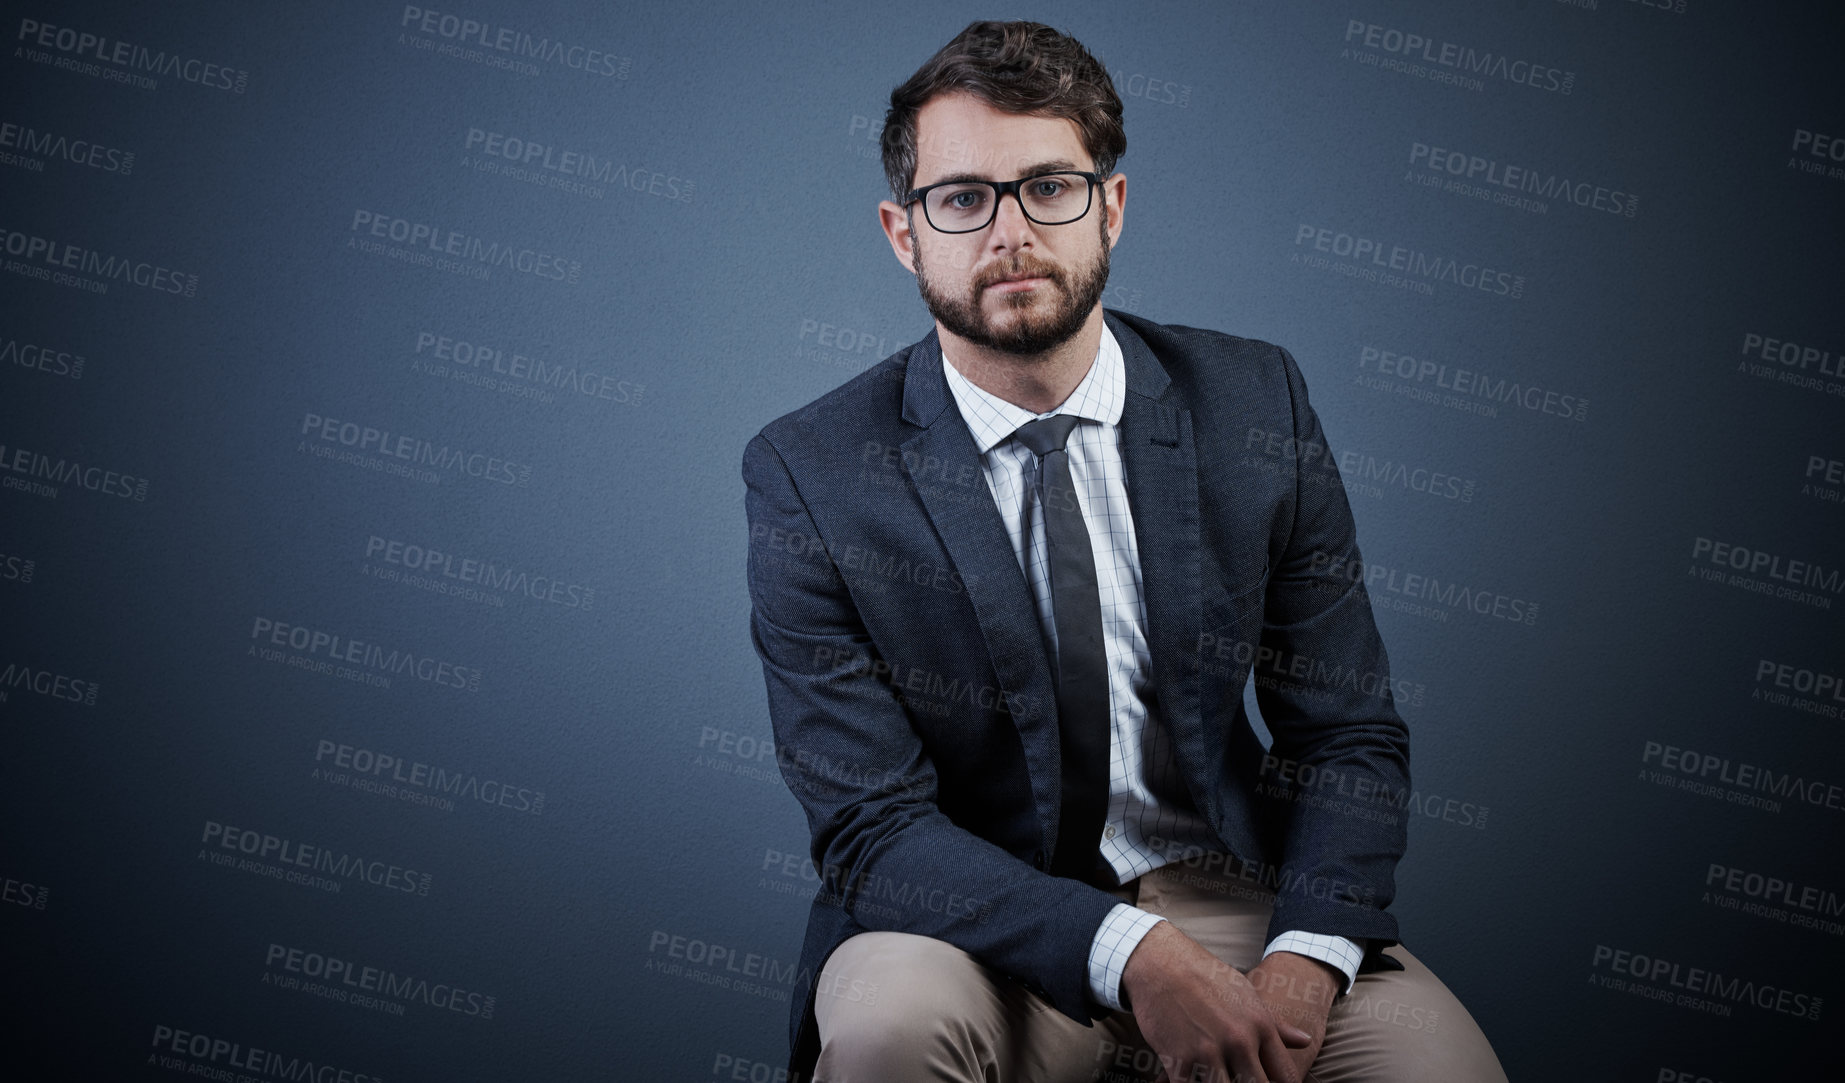 Buy stock photo Studio portrait of a handsome young businessman sitting on a chair against a dark background